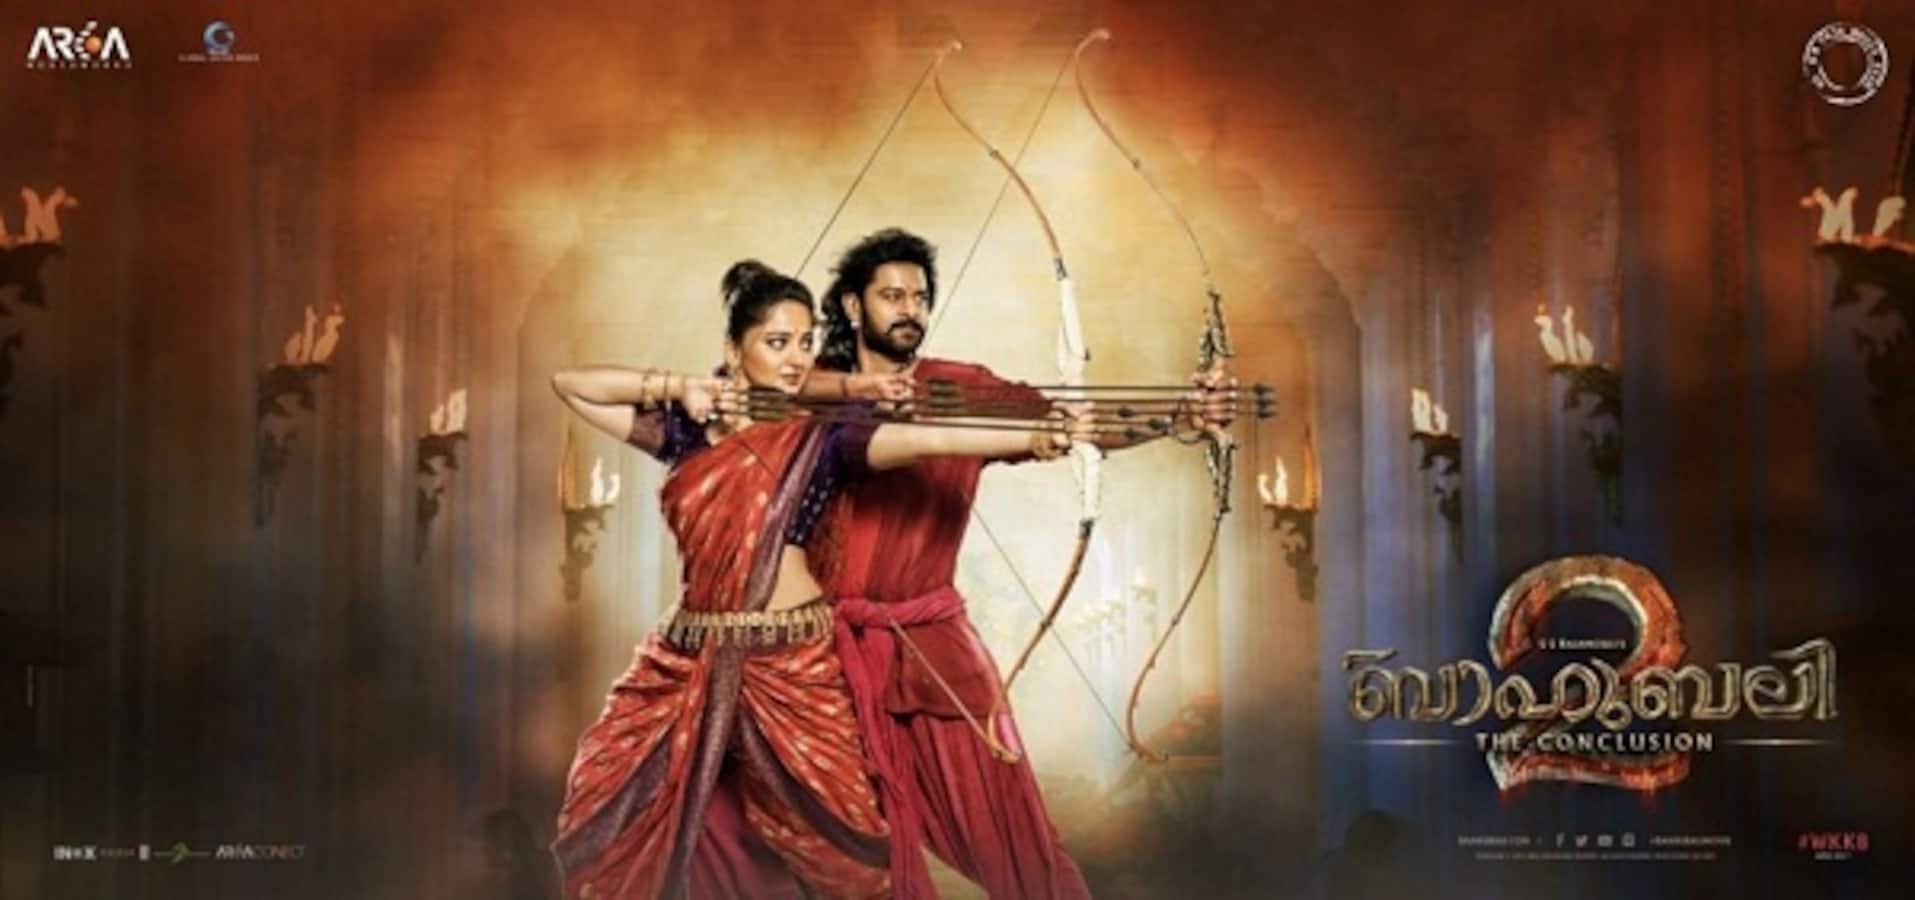 Baahubali:The Conclusion is the only Indian film to appear on Google's top ten films of 2017 globally!